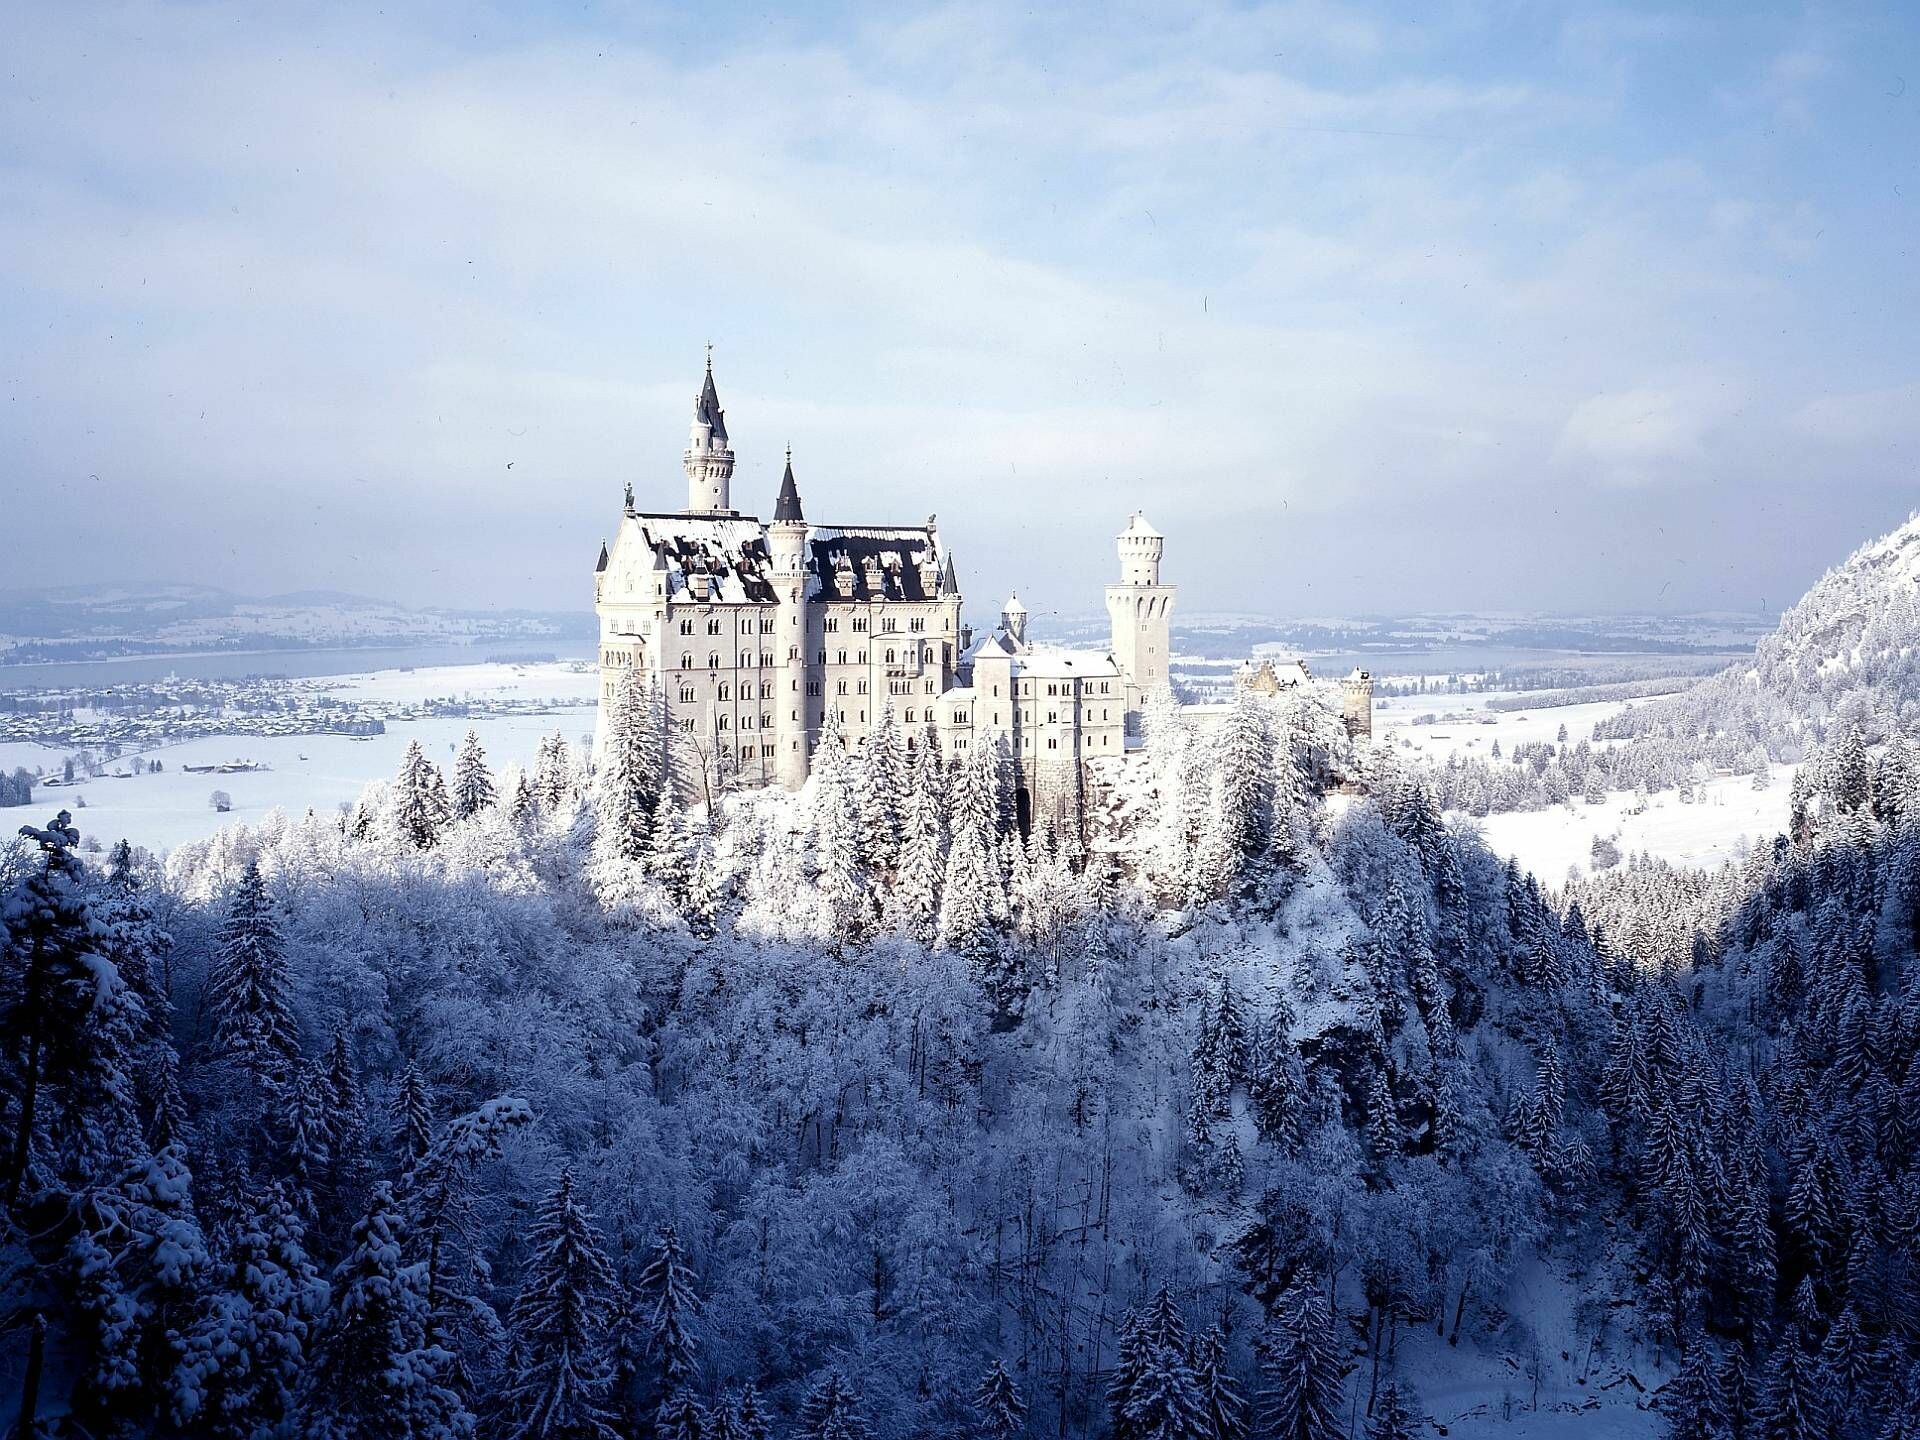 Neuschwanstein Castle: One of the most photographed castles in Germany, visited by 1.3 million people annually. 1920x1440 HD Wallpaper.